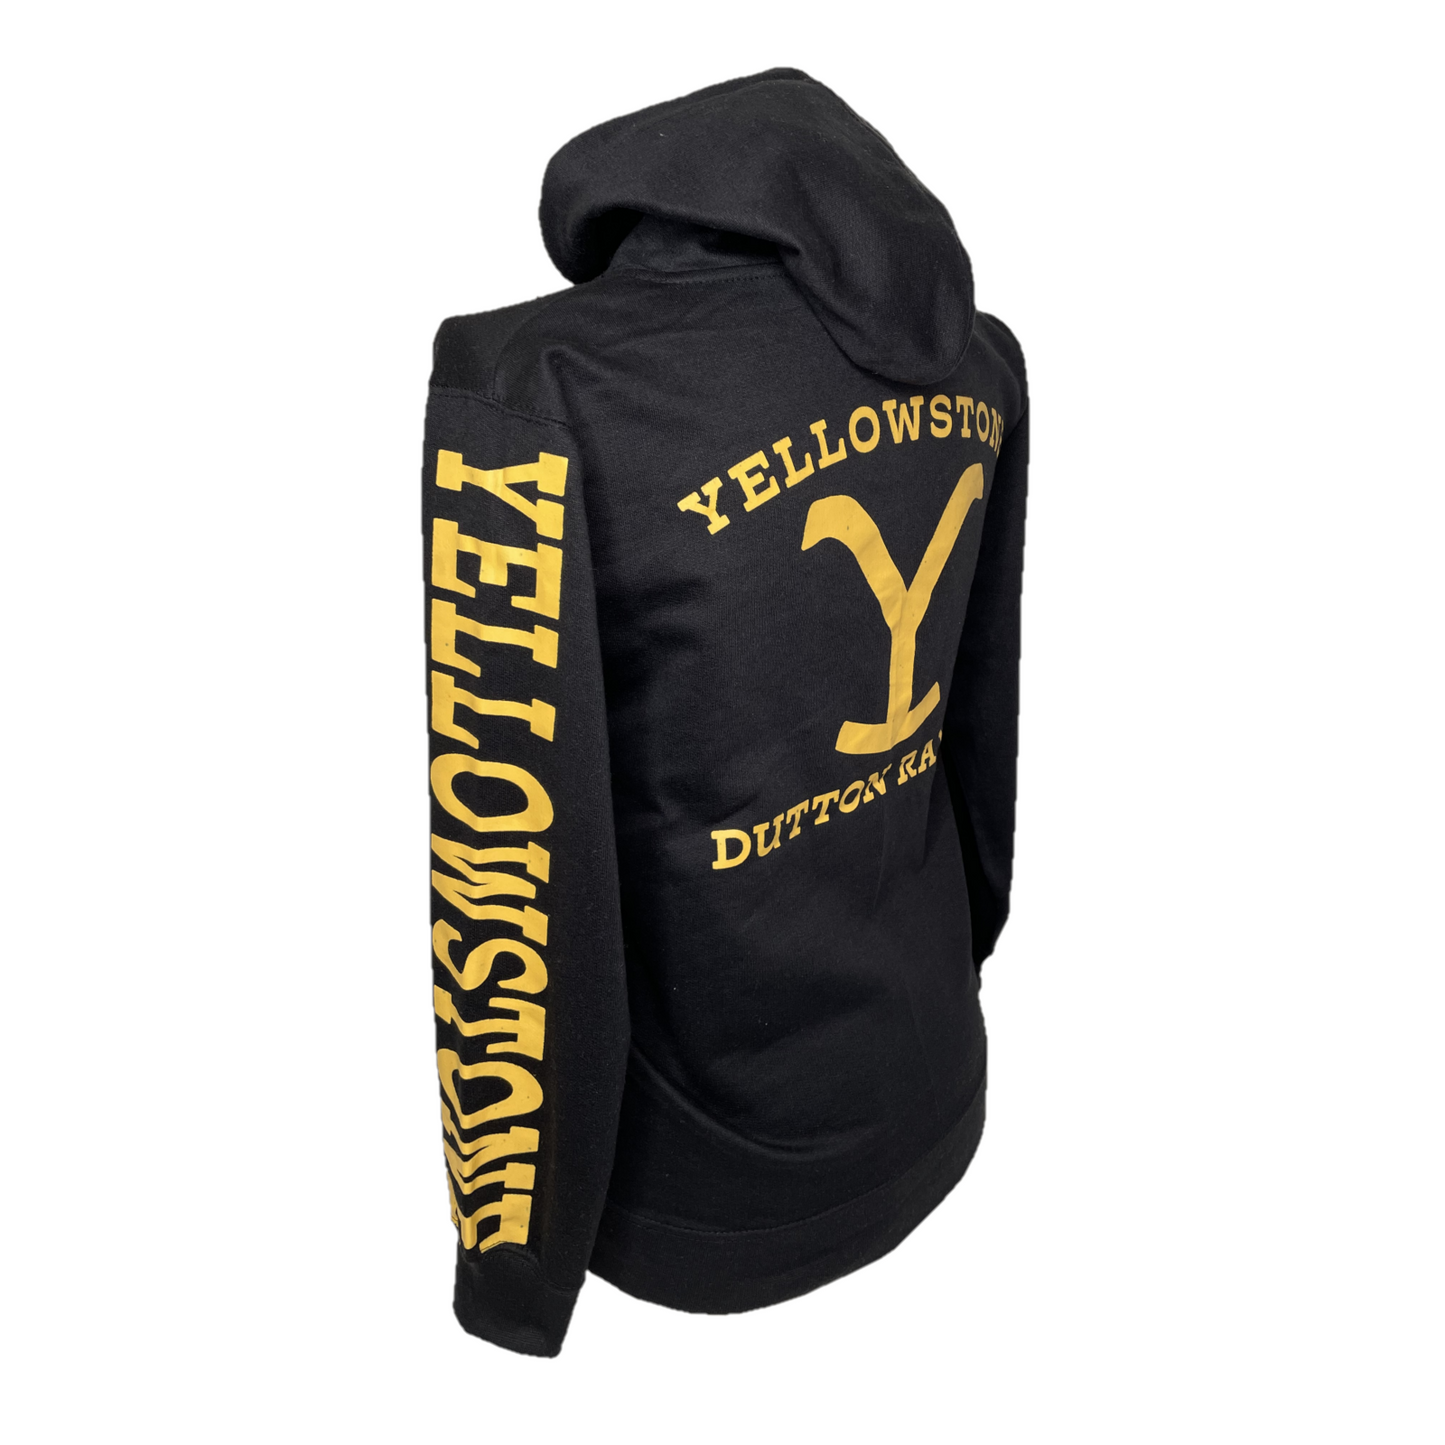 Yellowstone® Men's Dutton Ranch Graphic Pullover Black Hoodie 66-259-78